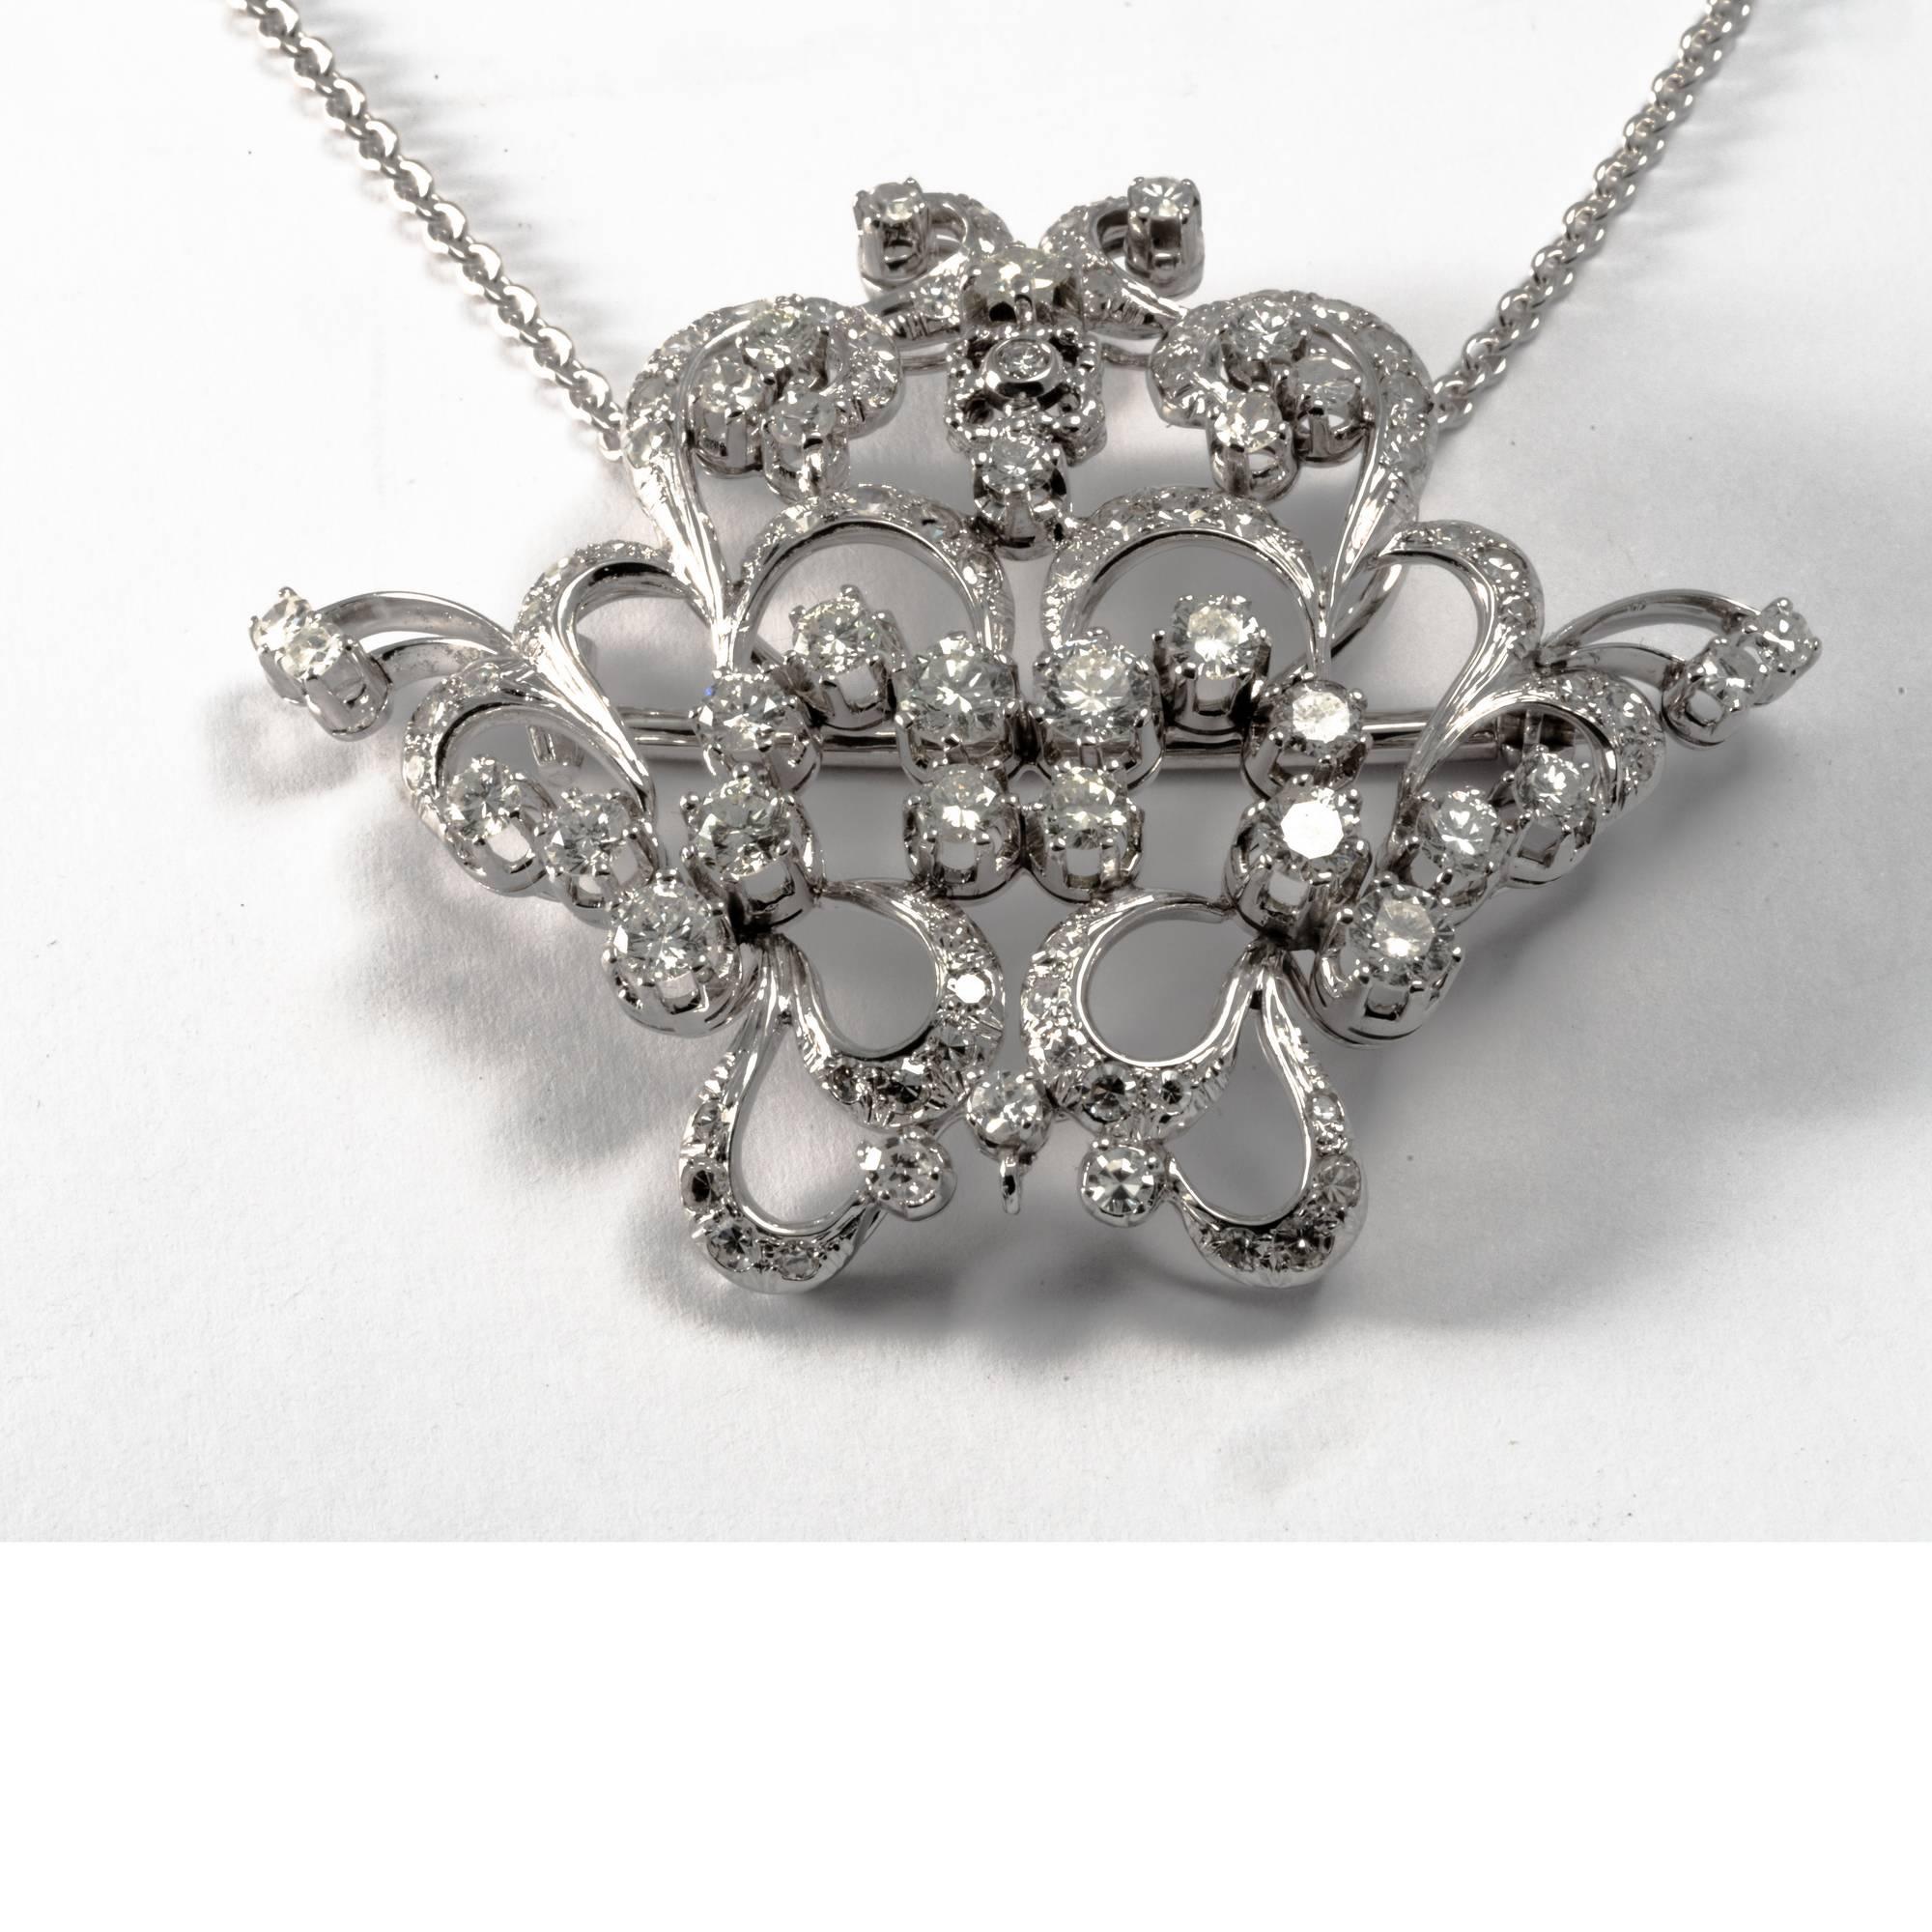 18K Midcentury Vintage Garland Intricated Open Work Diamond Necklace and Brooch For Sale 1